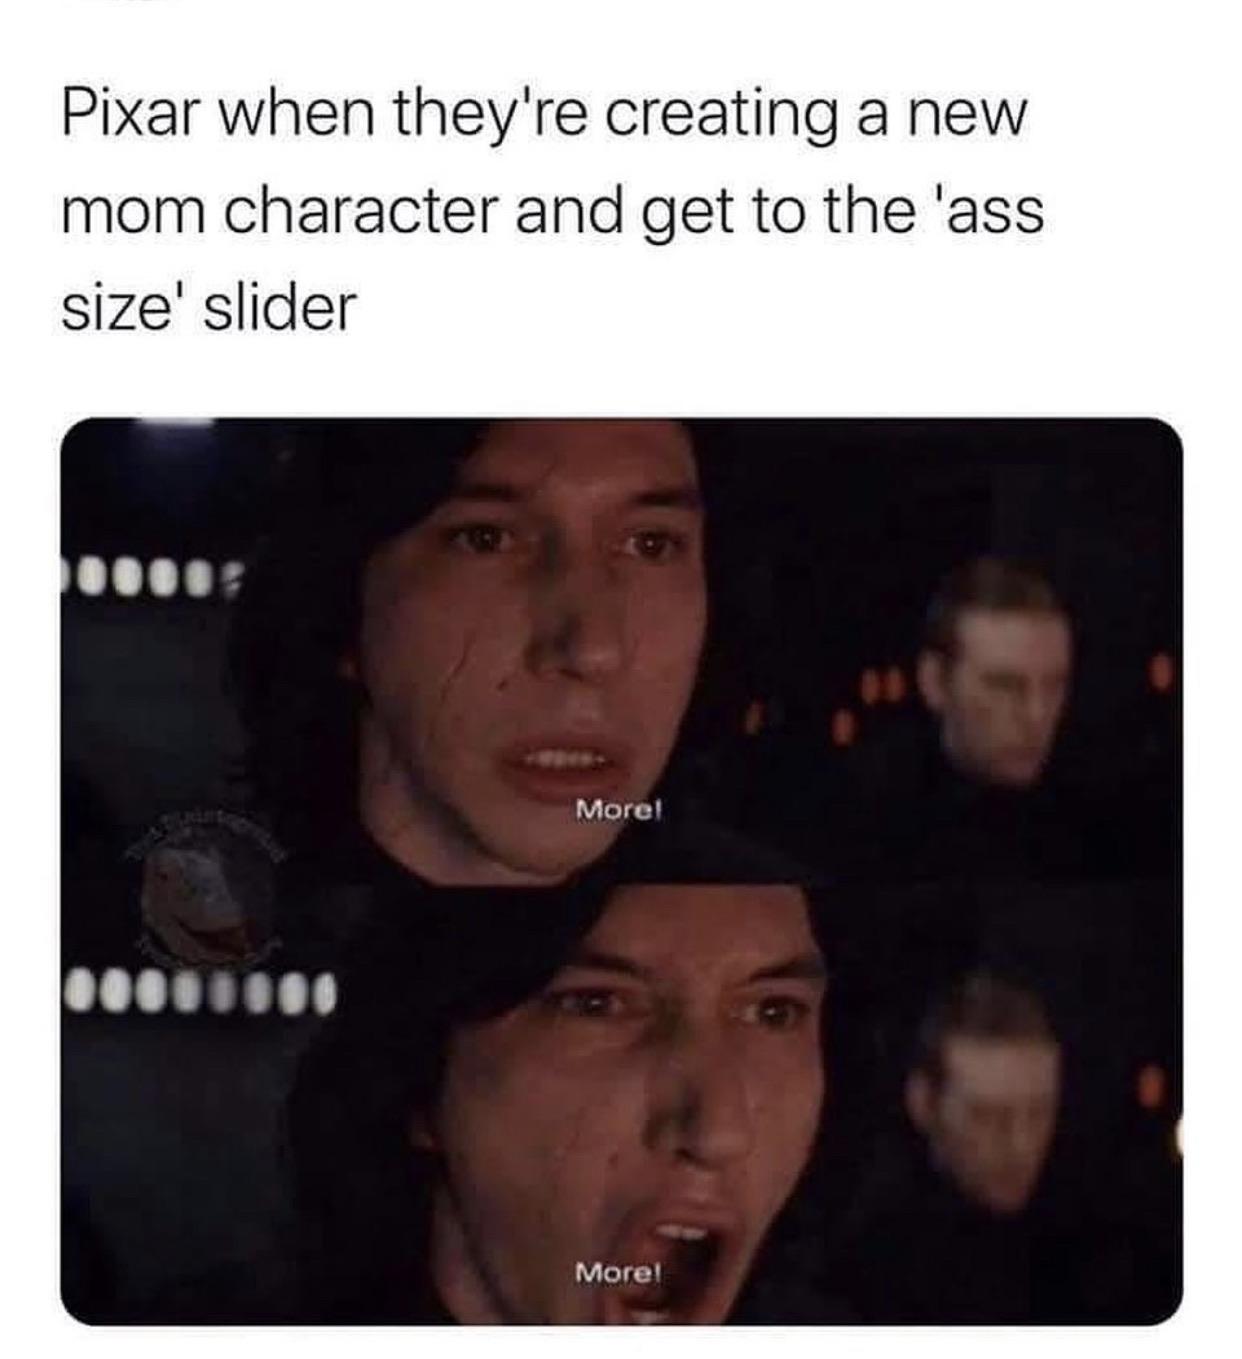 Sequel-memes,  Star Wars Memes Sequel-memes,  text: Pixar when they're creating a new mom character and get to the lass sizel slider More' More' 